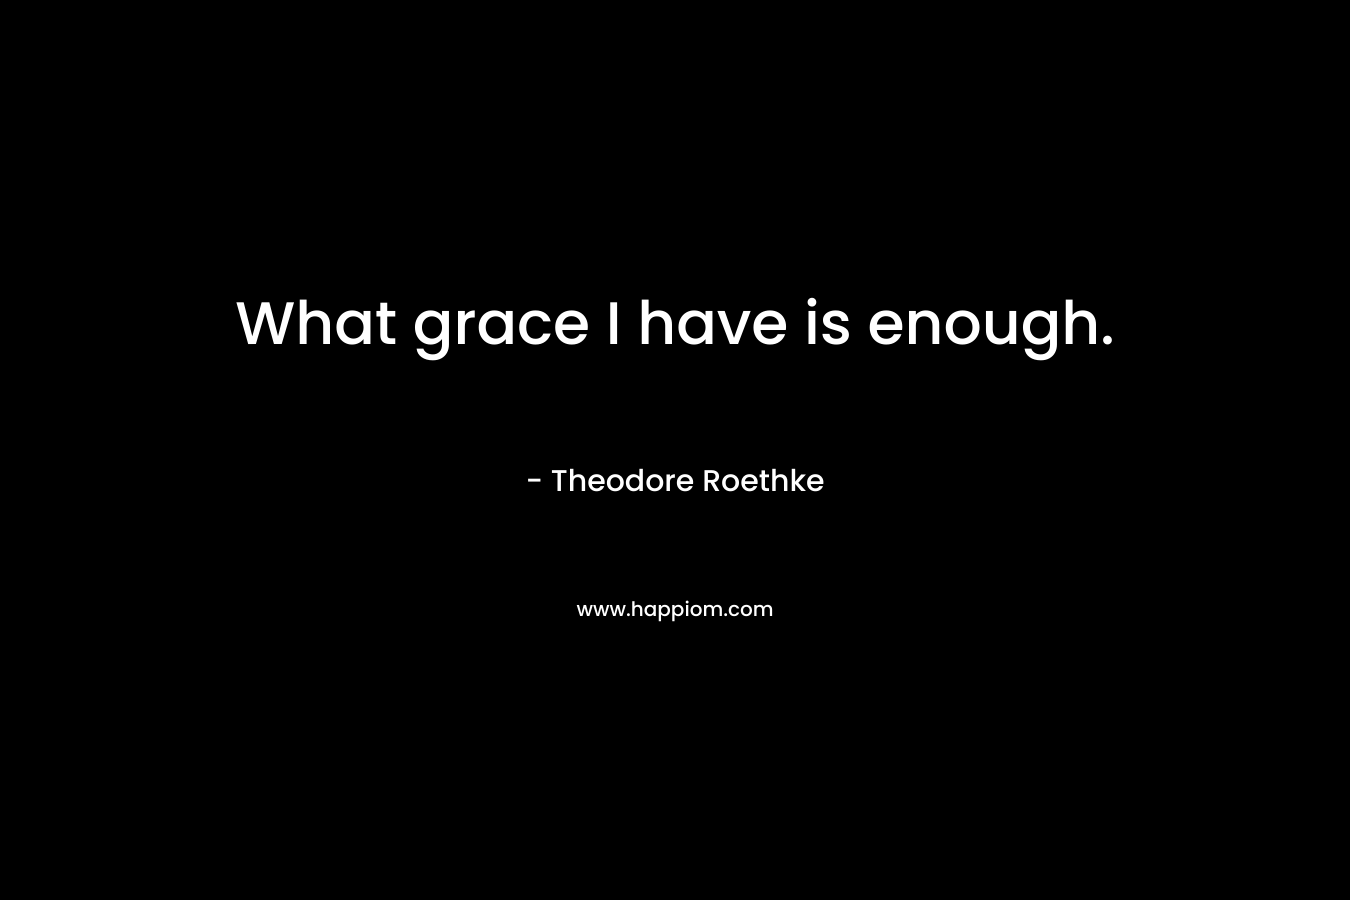 What grace I have is enough.